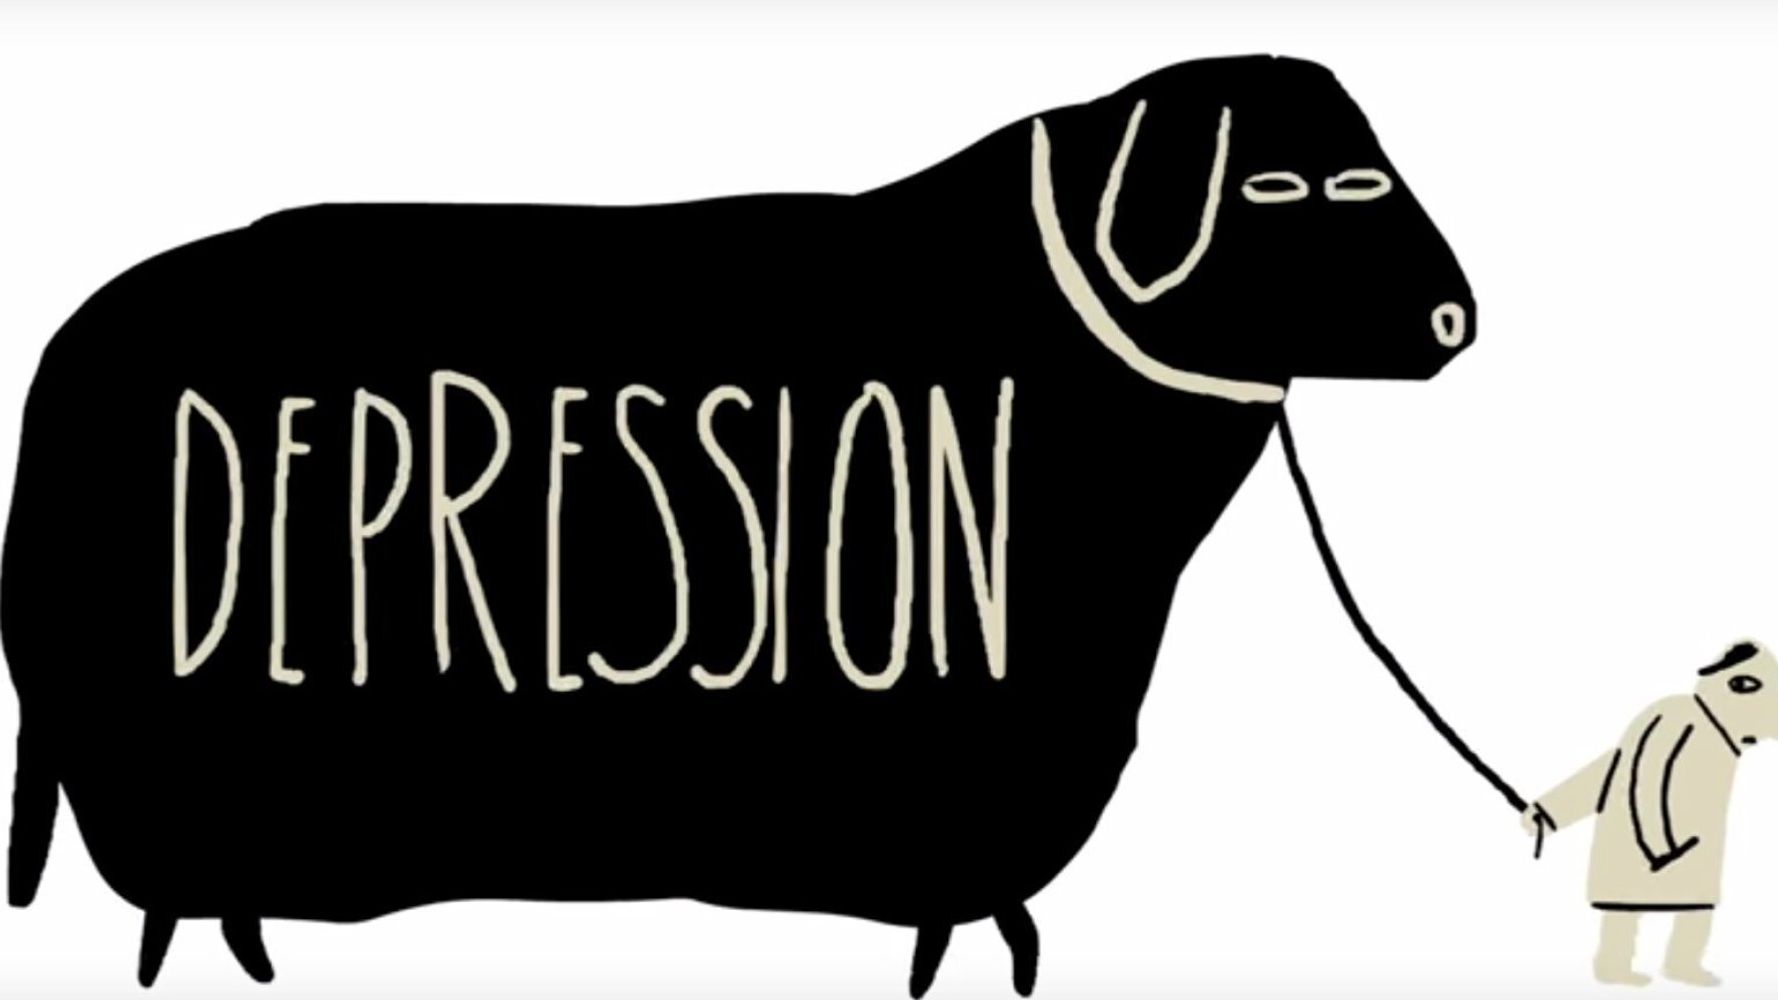 Animation Perfectly Explains What Depression Is And Offers Advice On How To  Help Someone Battling It | HuffPost UK Life